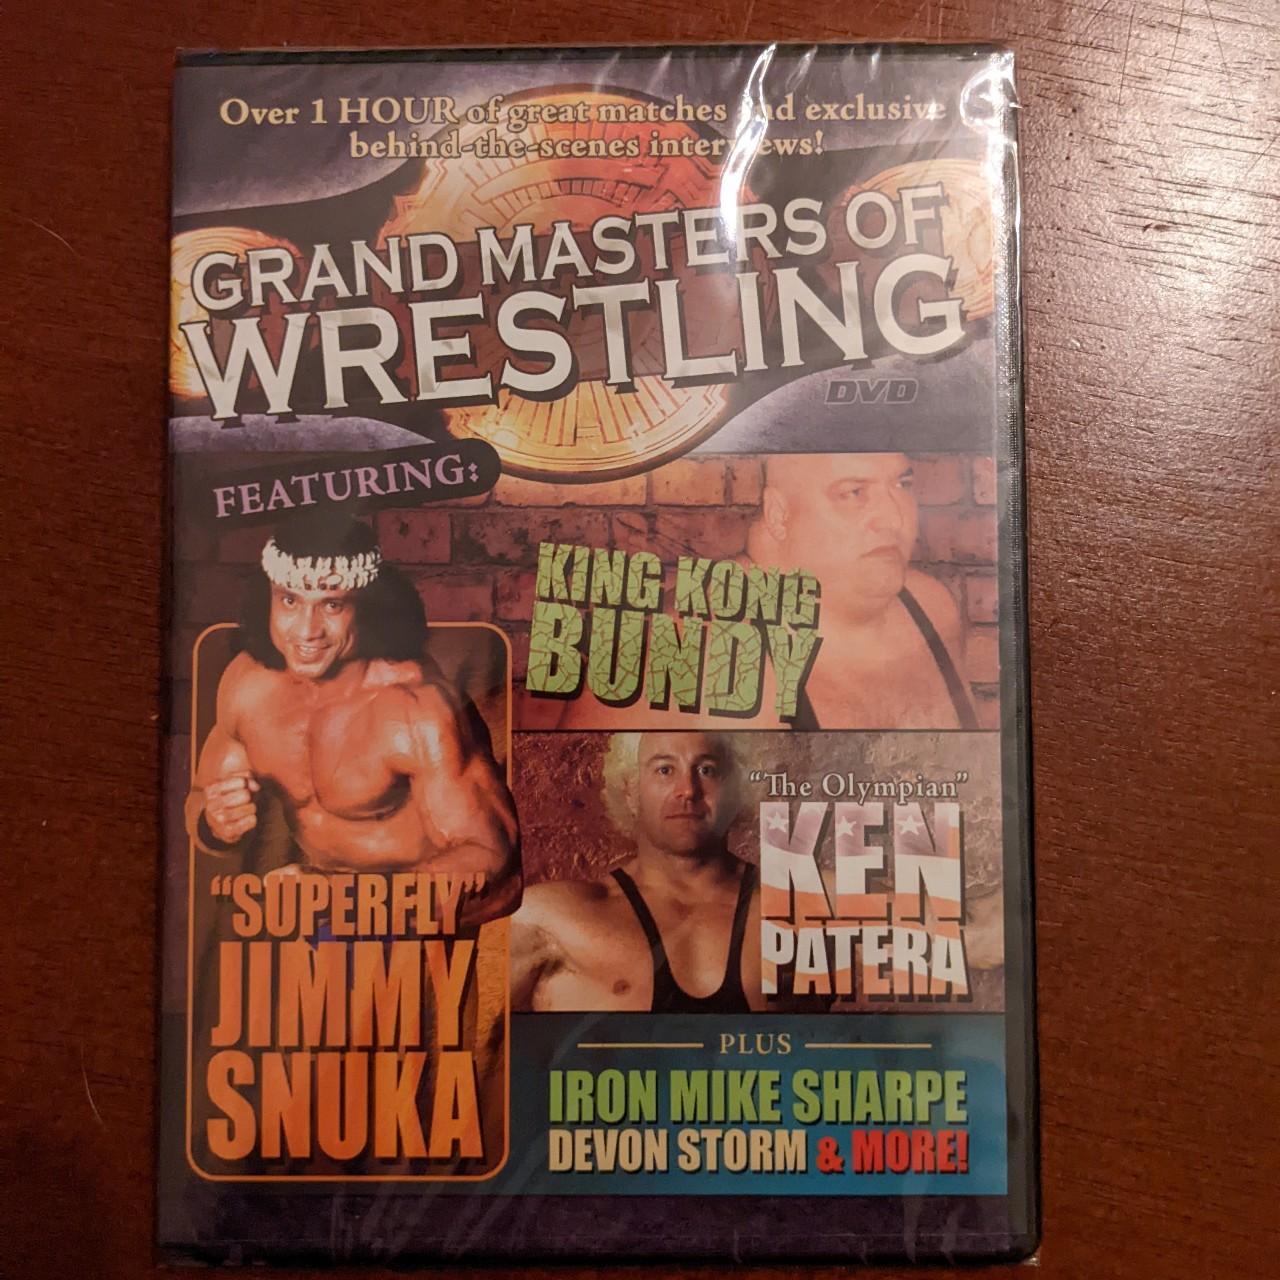 Grand Masters of Wrestling, Part 1